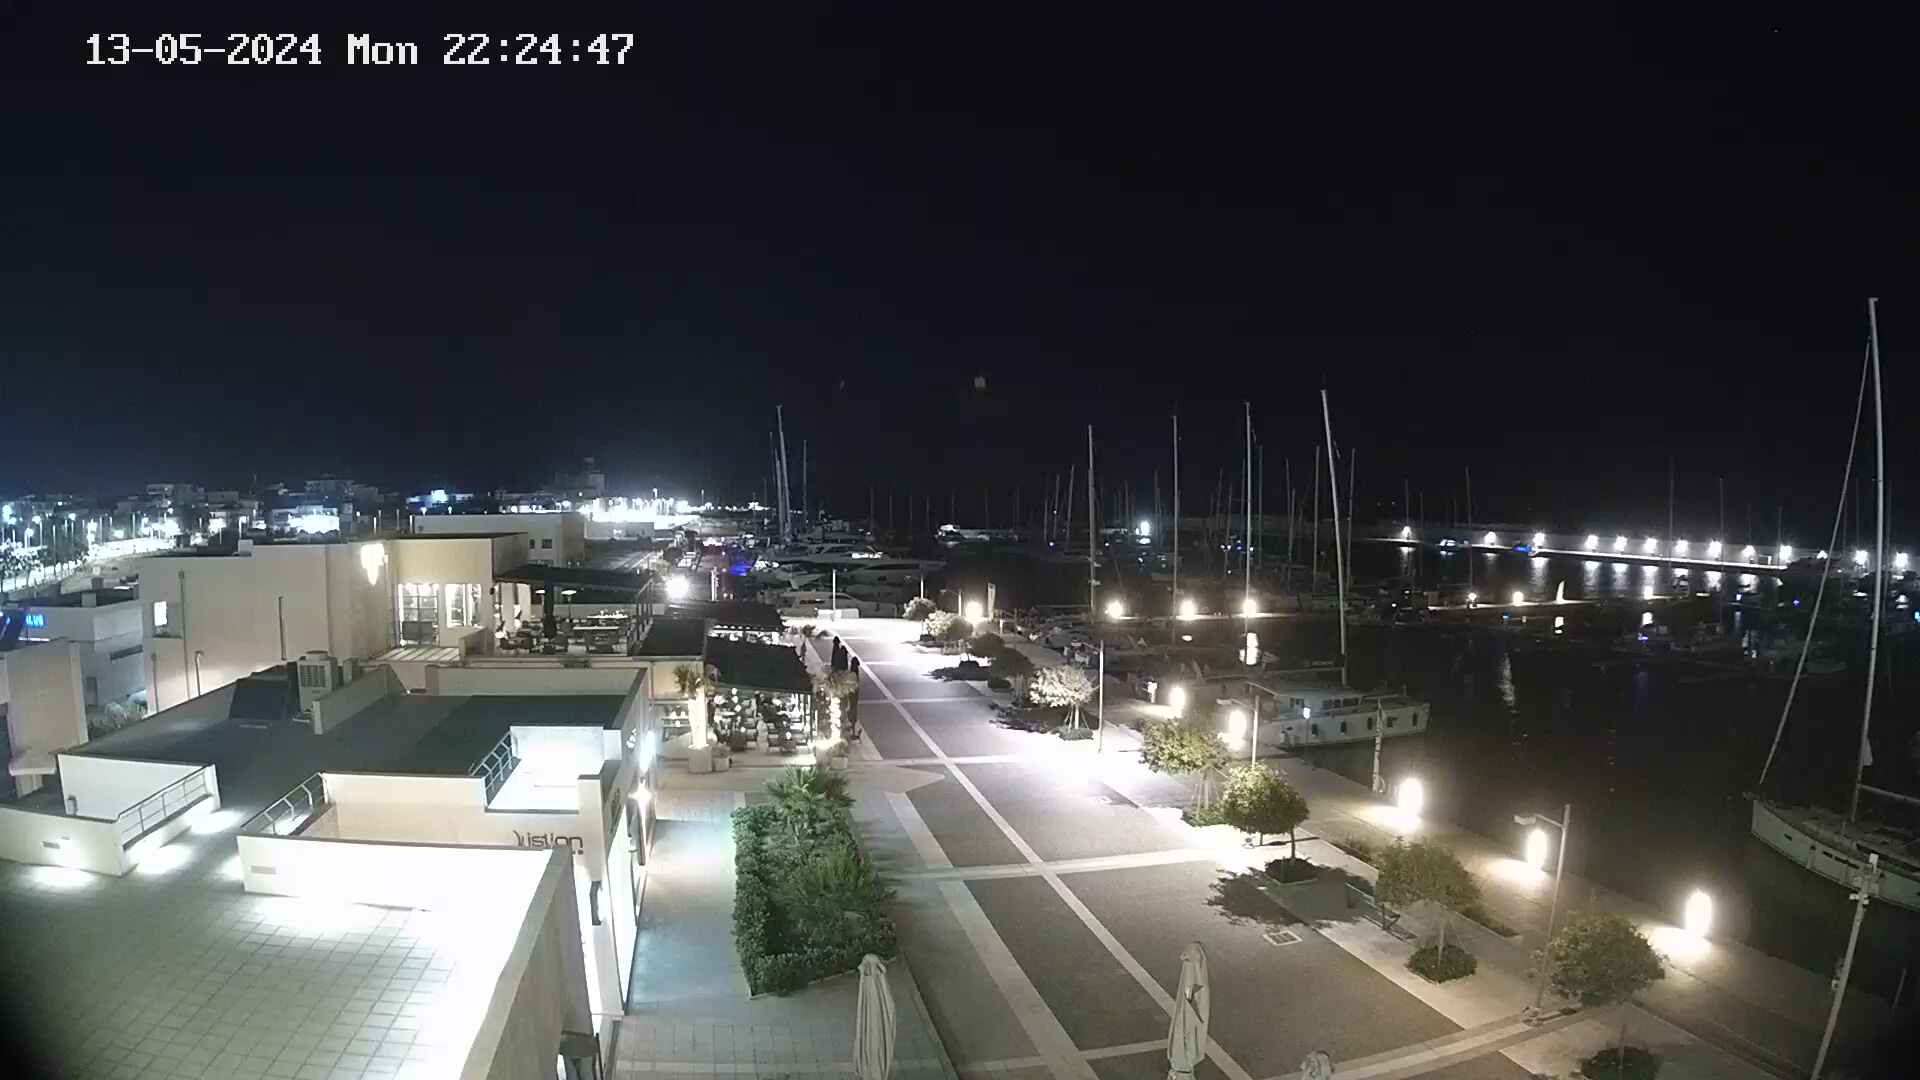 Rhodos Stadt Mo. 22:26